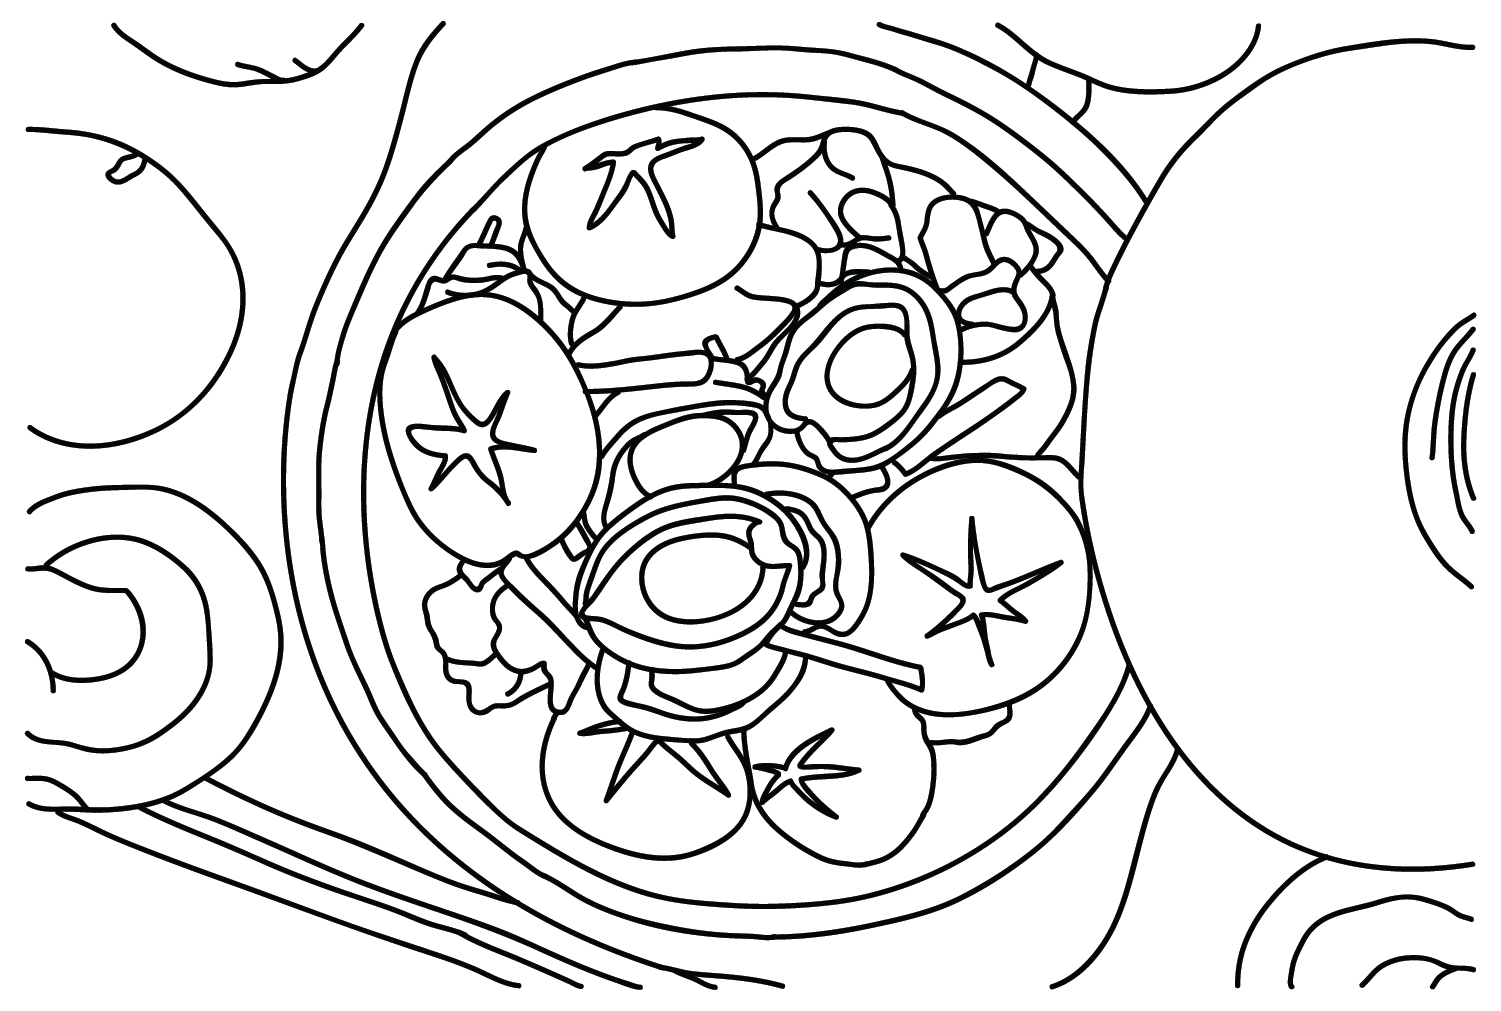 Braised Abalone Coloring Page from Animals